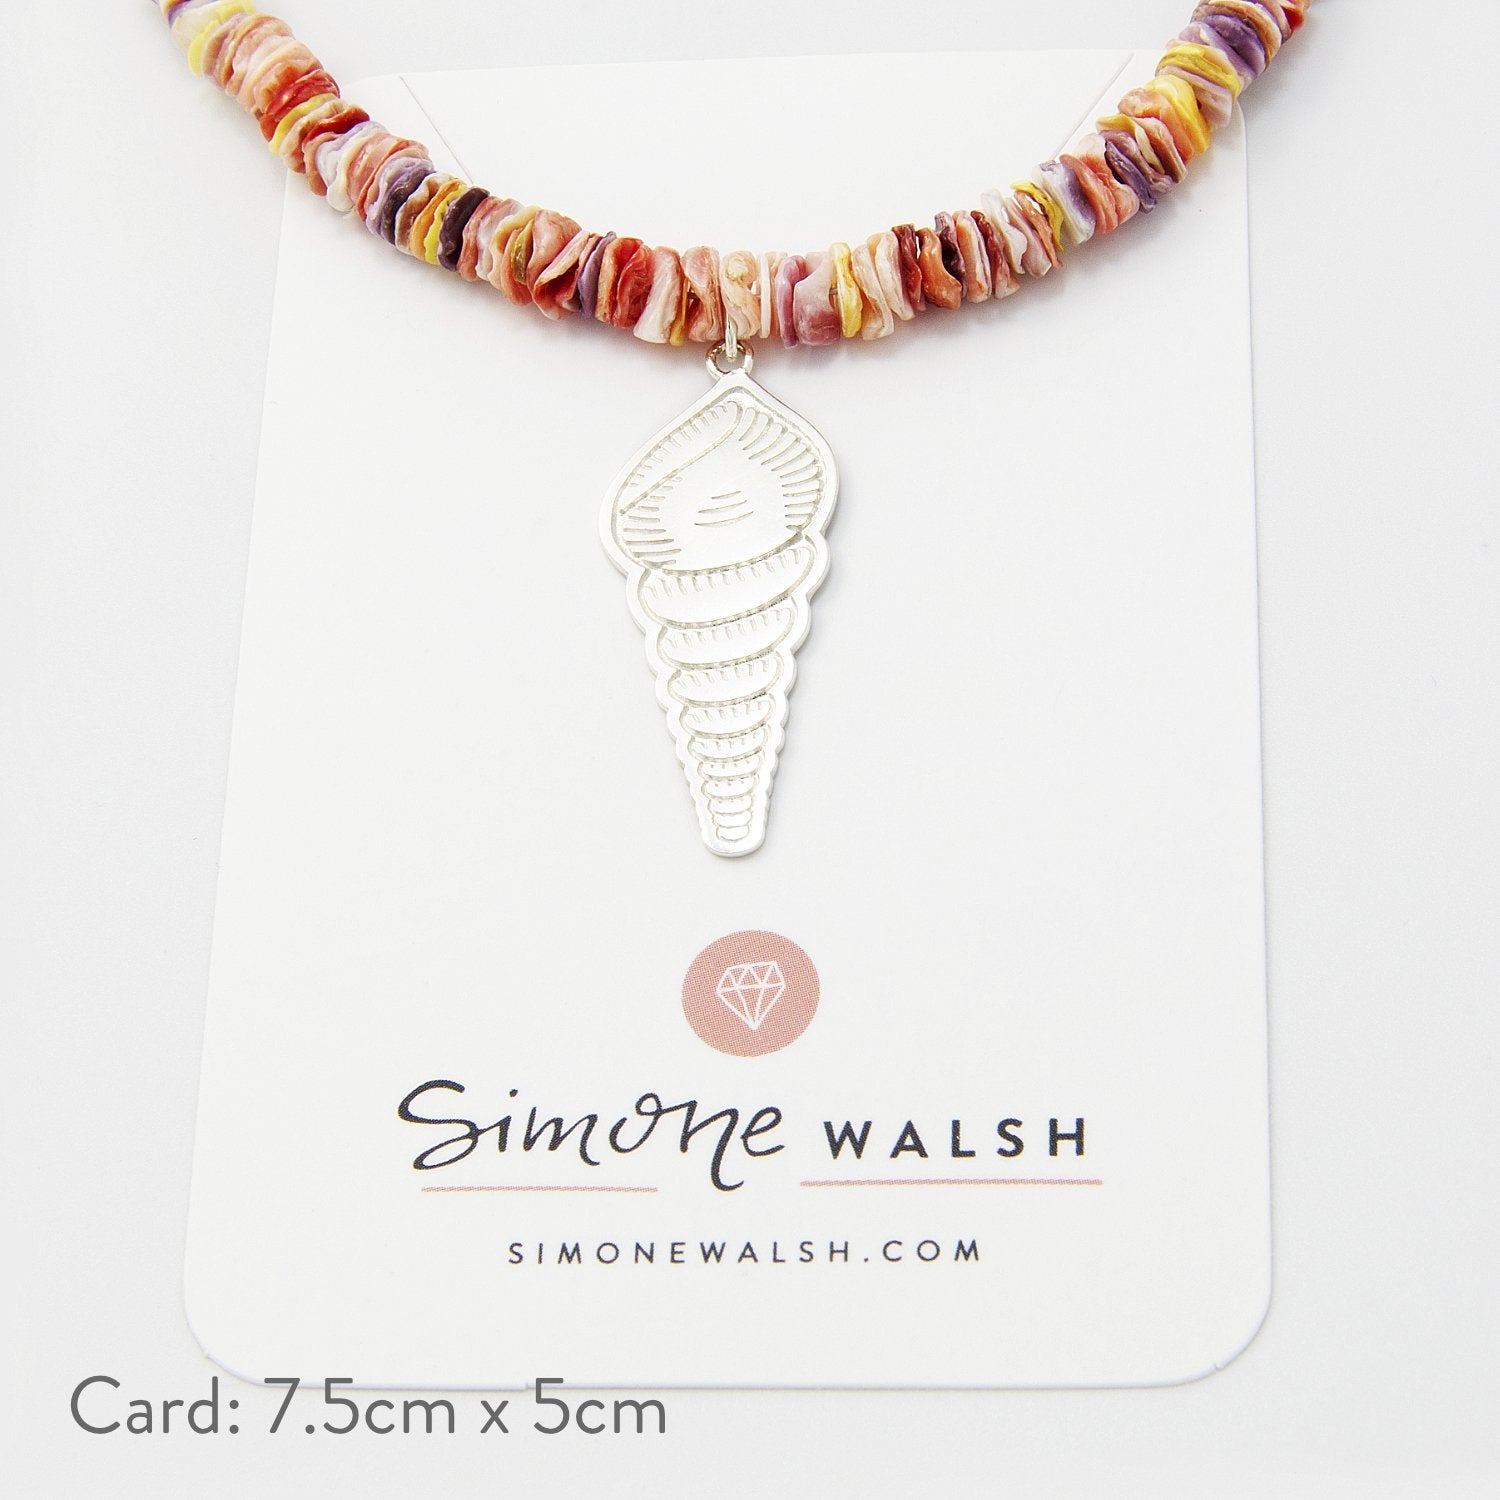 Spiral shell on scallop shell beaded necklace - Simone Walsh Jewellery Australia